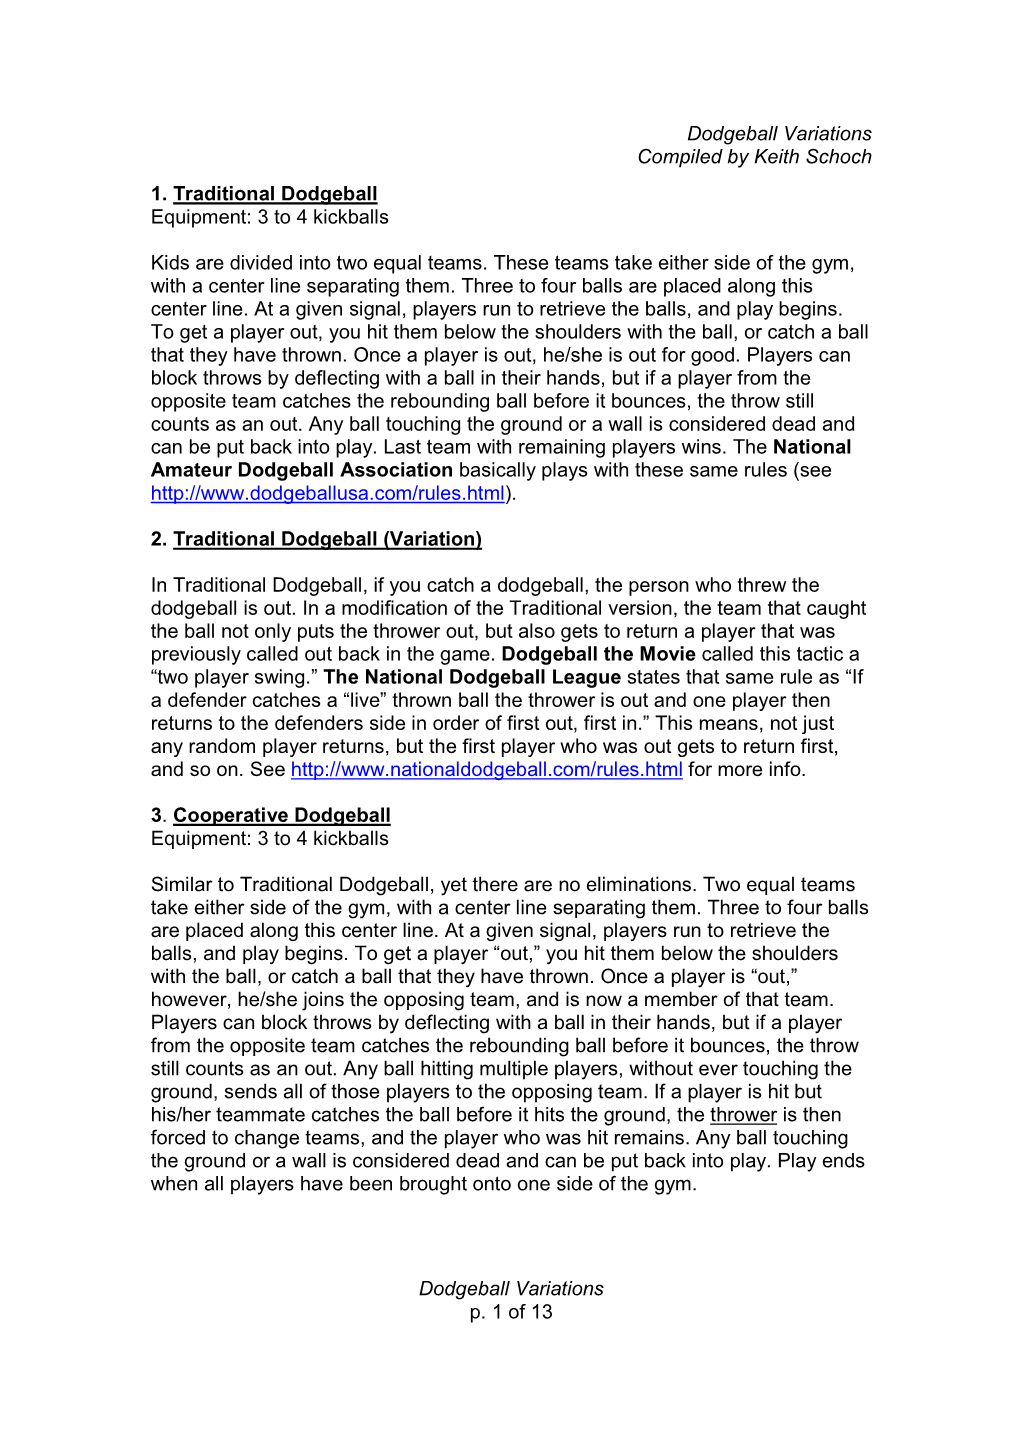 Dodgeball Variations Compiled by Keith Schoch Dodgeball Variations P. 1 of 13 1. Traditional Dodgeball Equipment